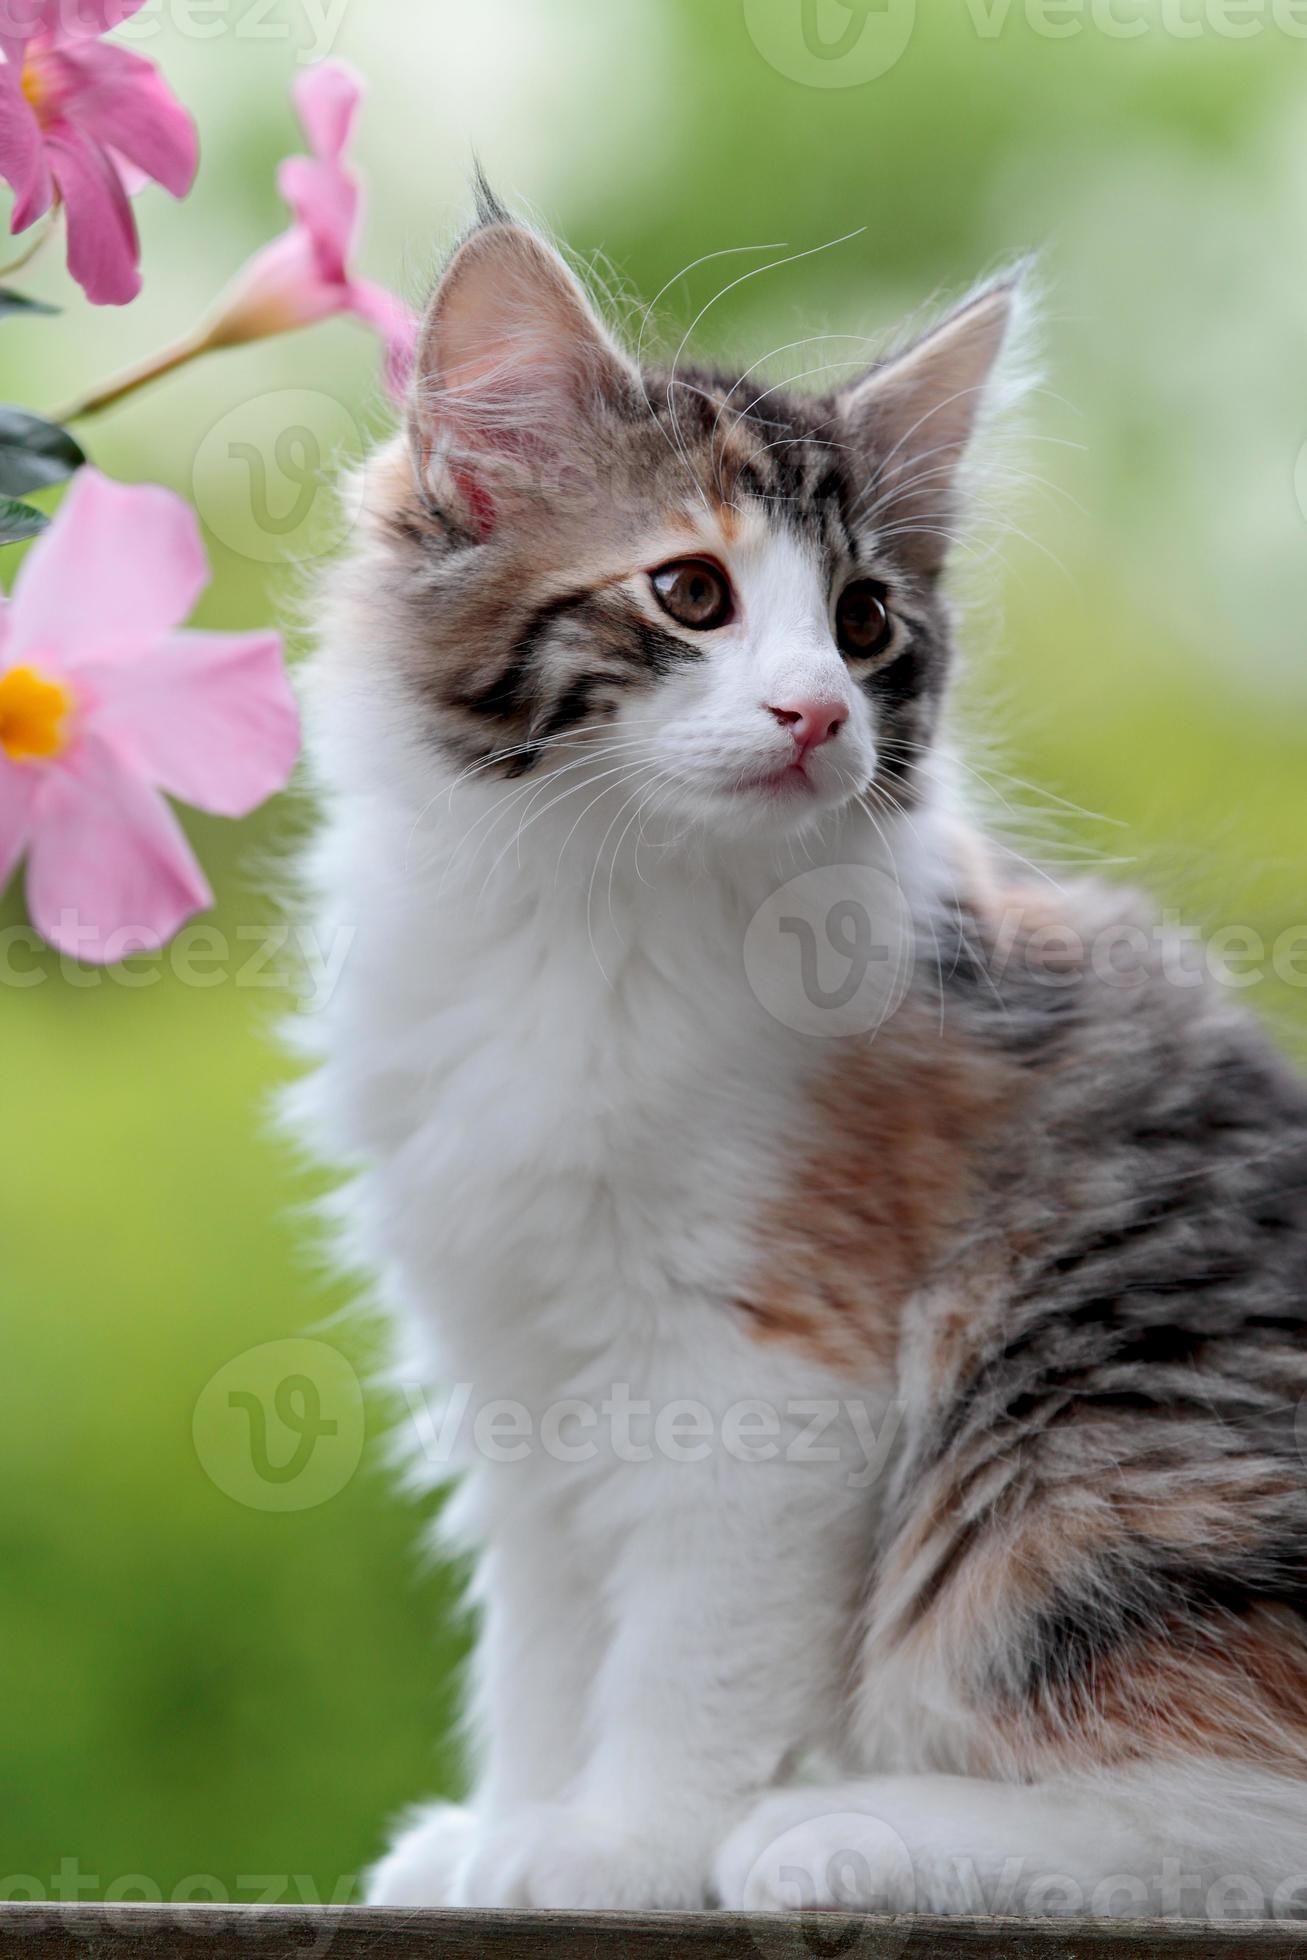 Norwegian forest cat kitten with pink flowers photo